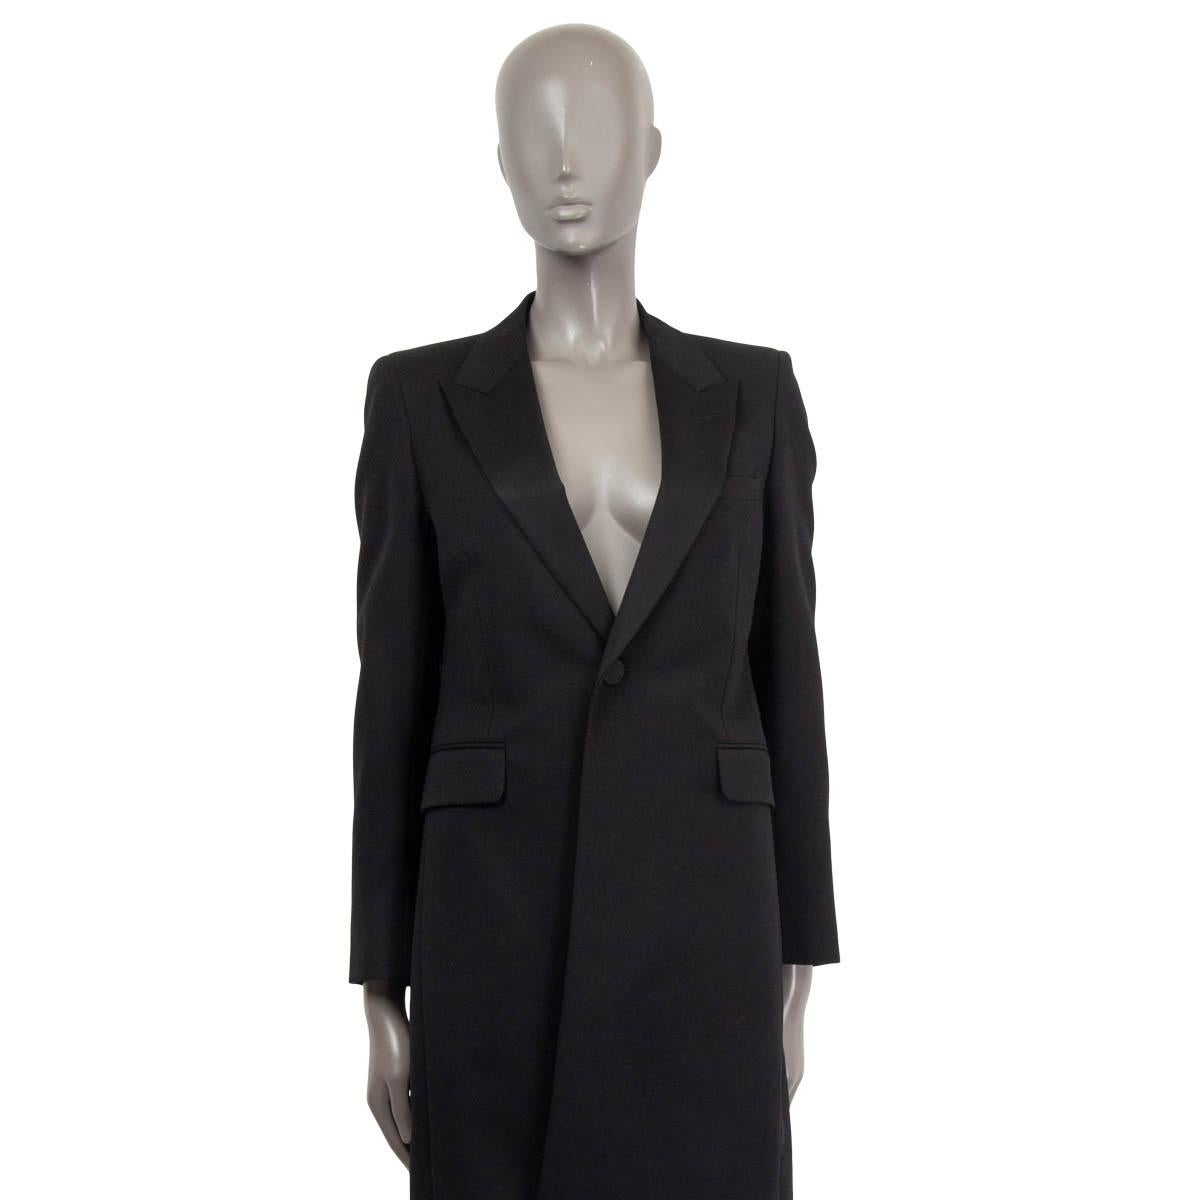 100% authentic Saint Laurent 20215 single button long blazer in black wool (100%). Features buttoned cuffs, a satin collar, two flap pockets and one chest pocket on the front. Opens with one button on the front. Lined in black silk (100%). Has been